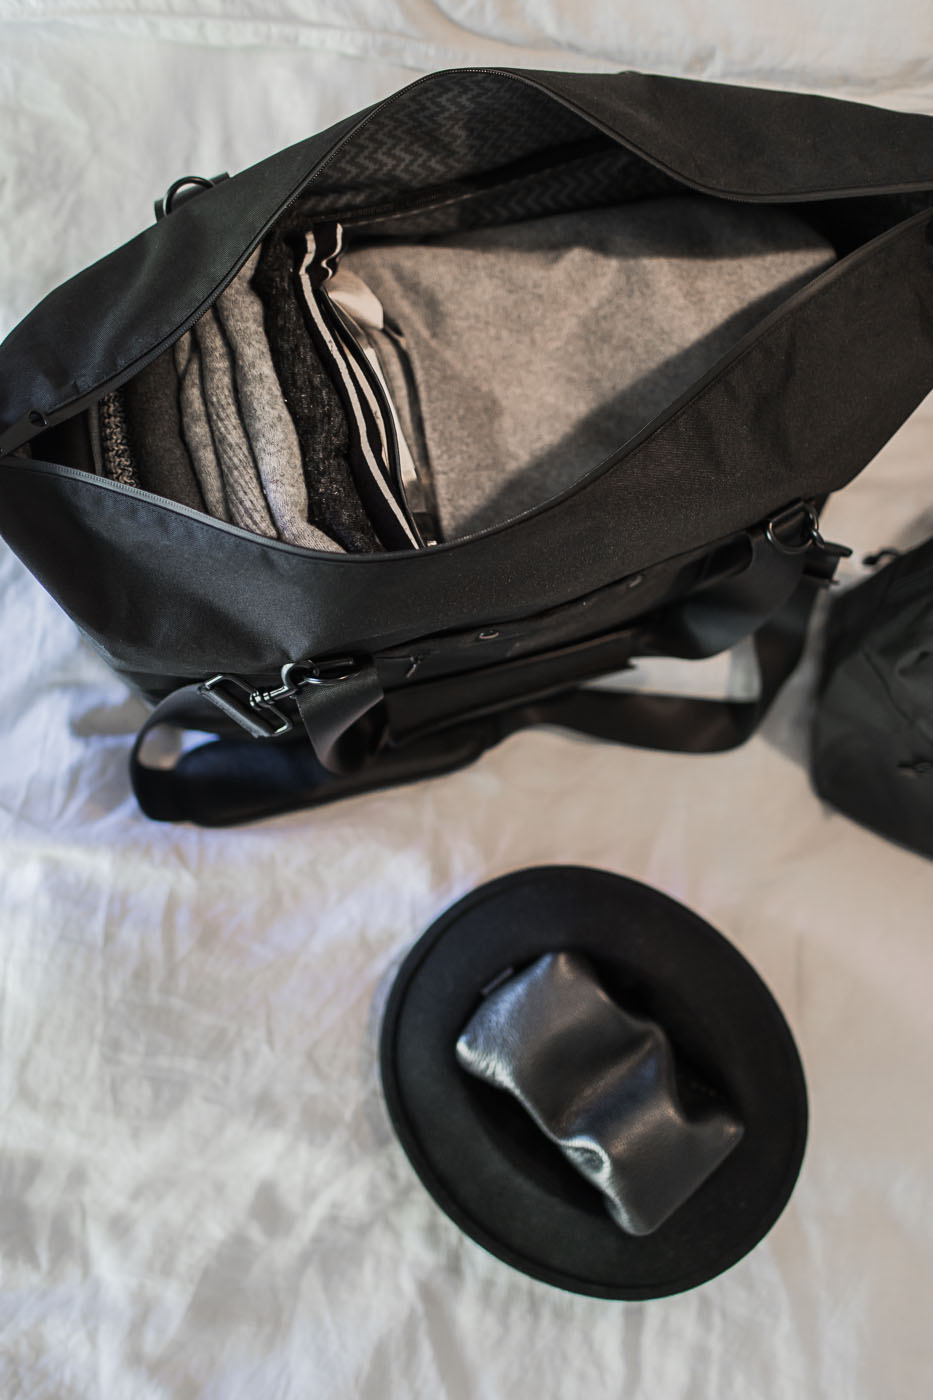 5 Tips For Packing a Weekender Bag